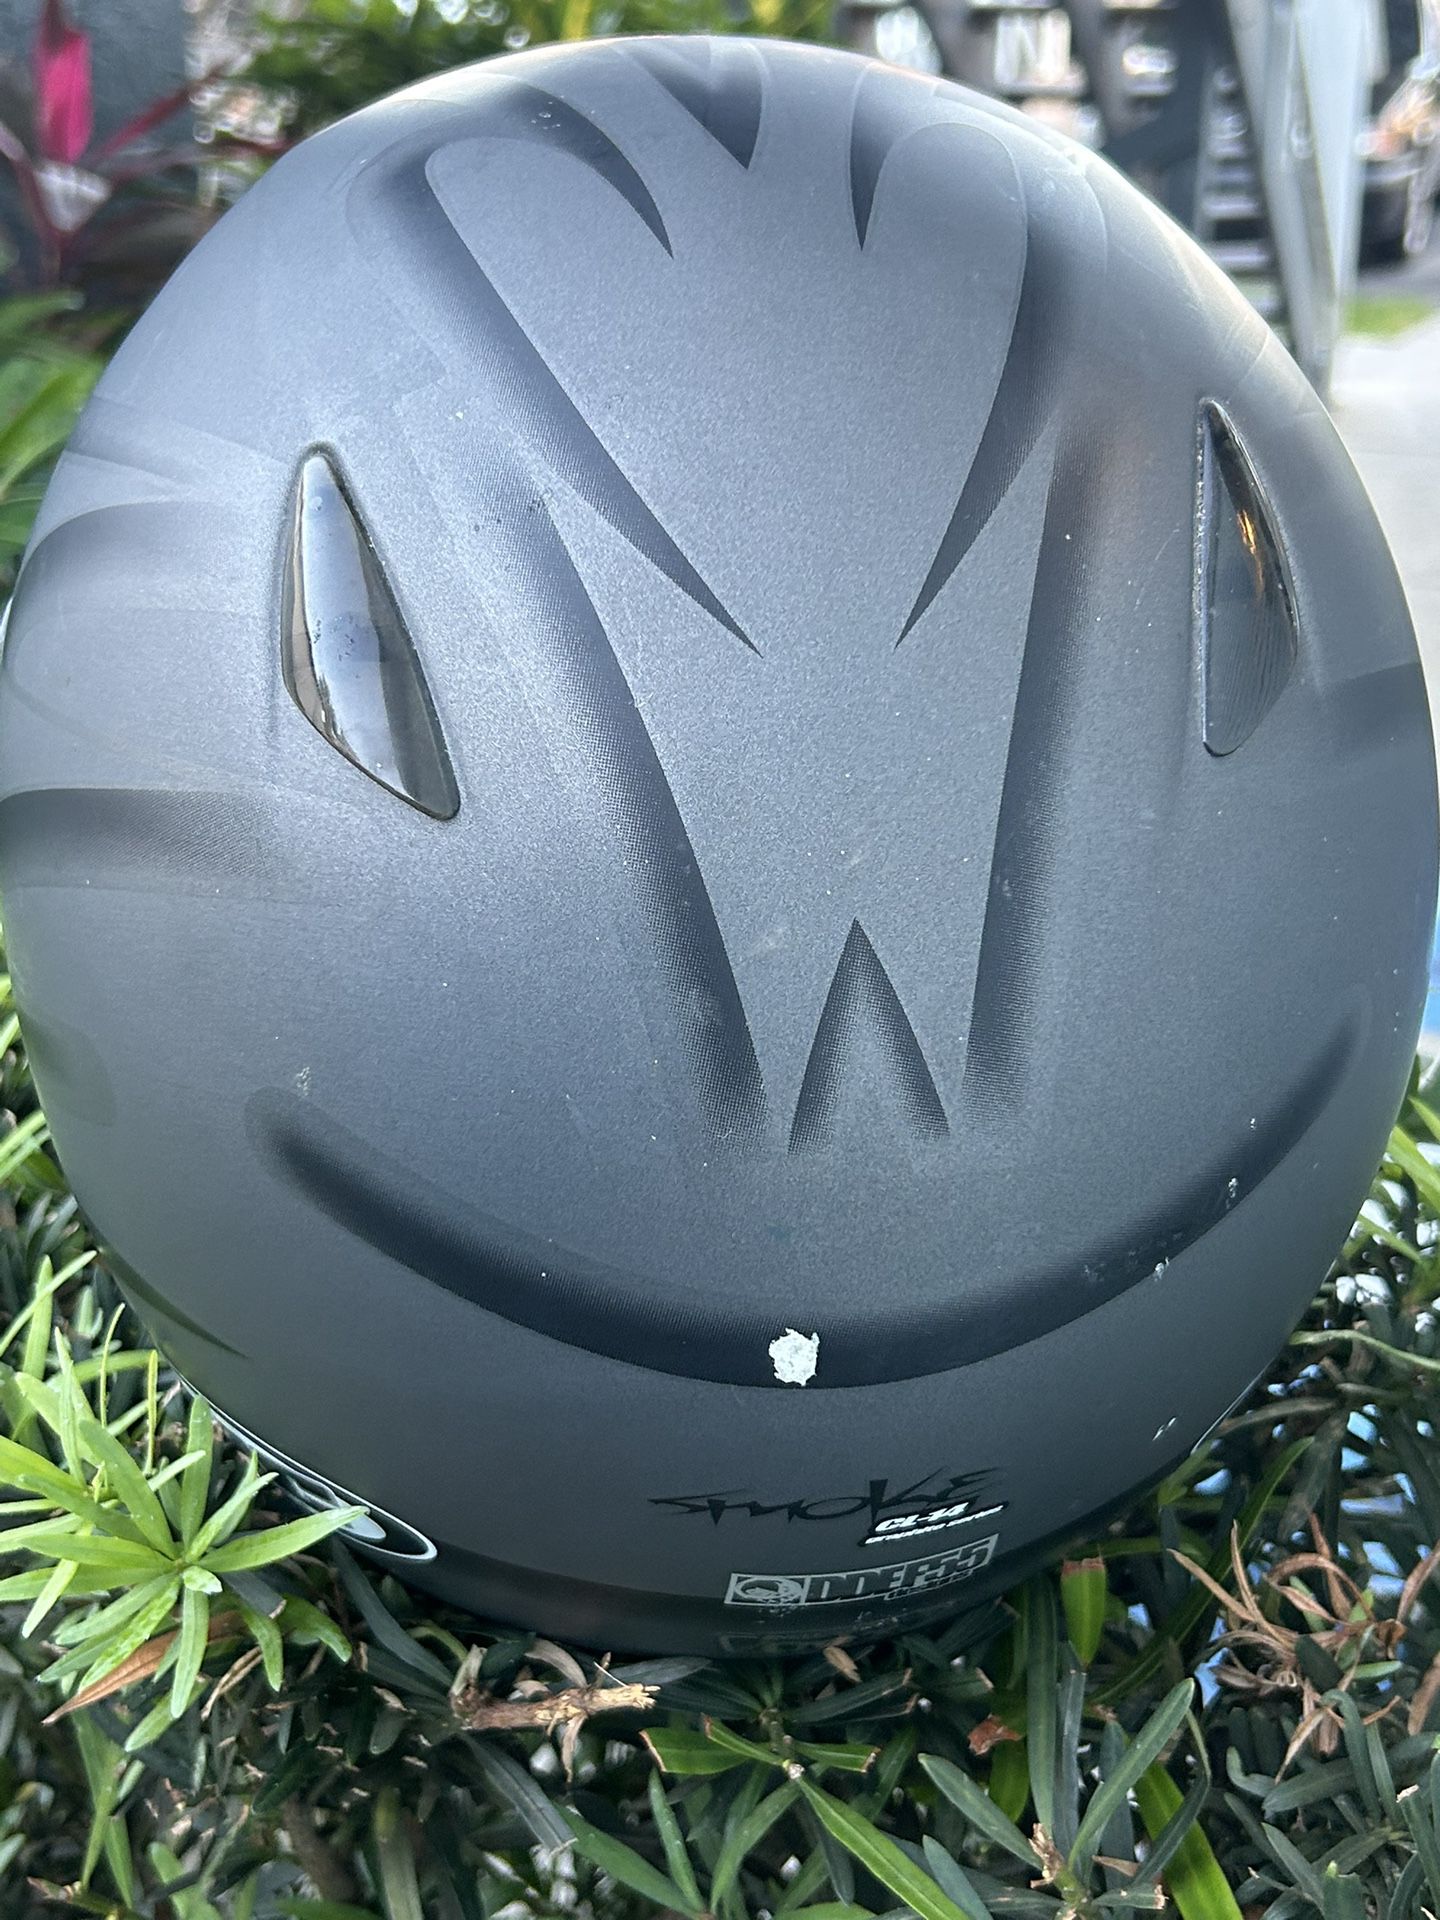 Motorcycle Helmet, HJC Large Excellent condition